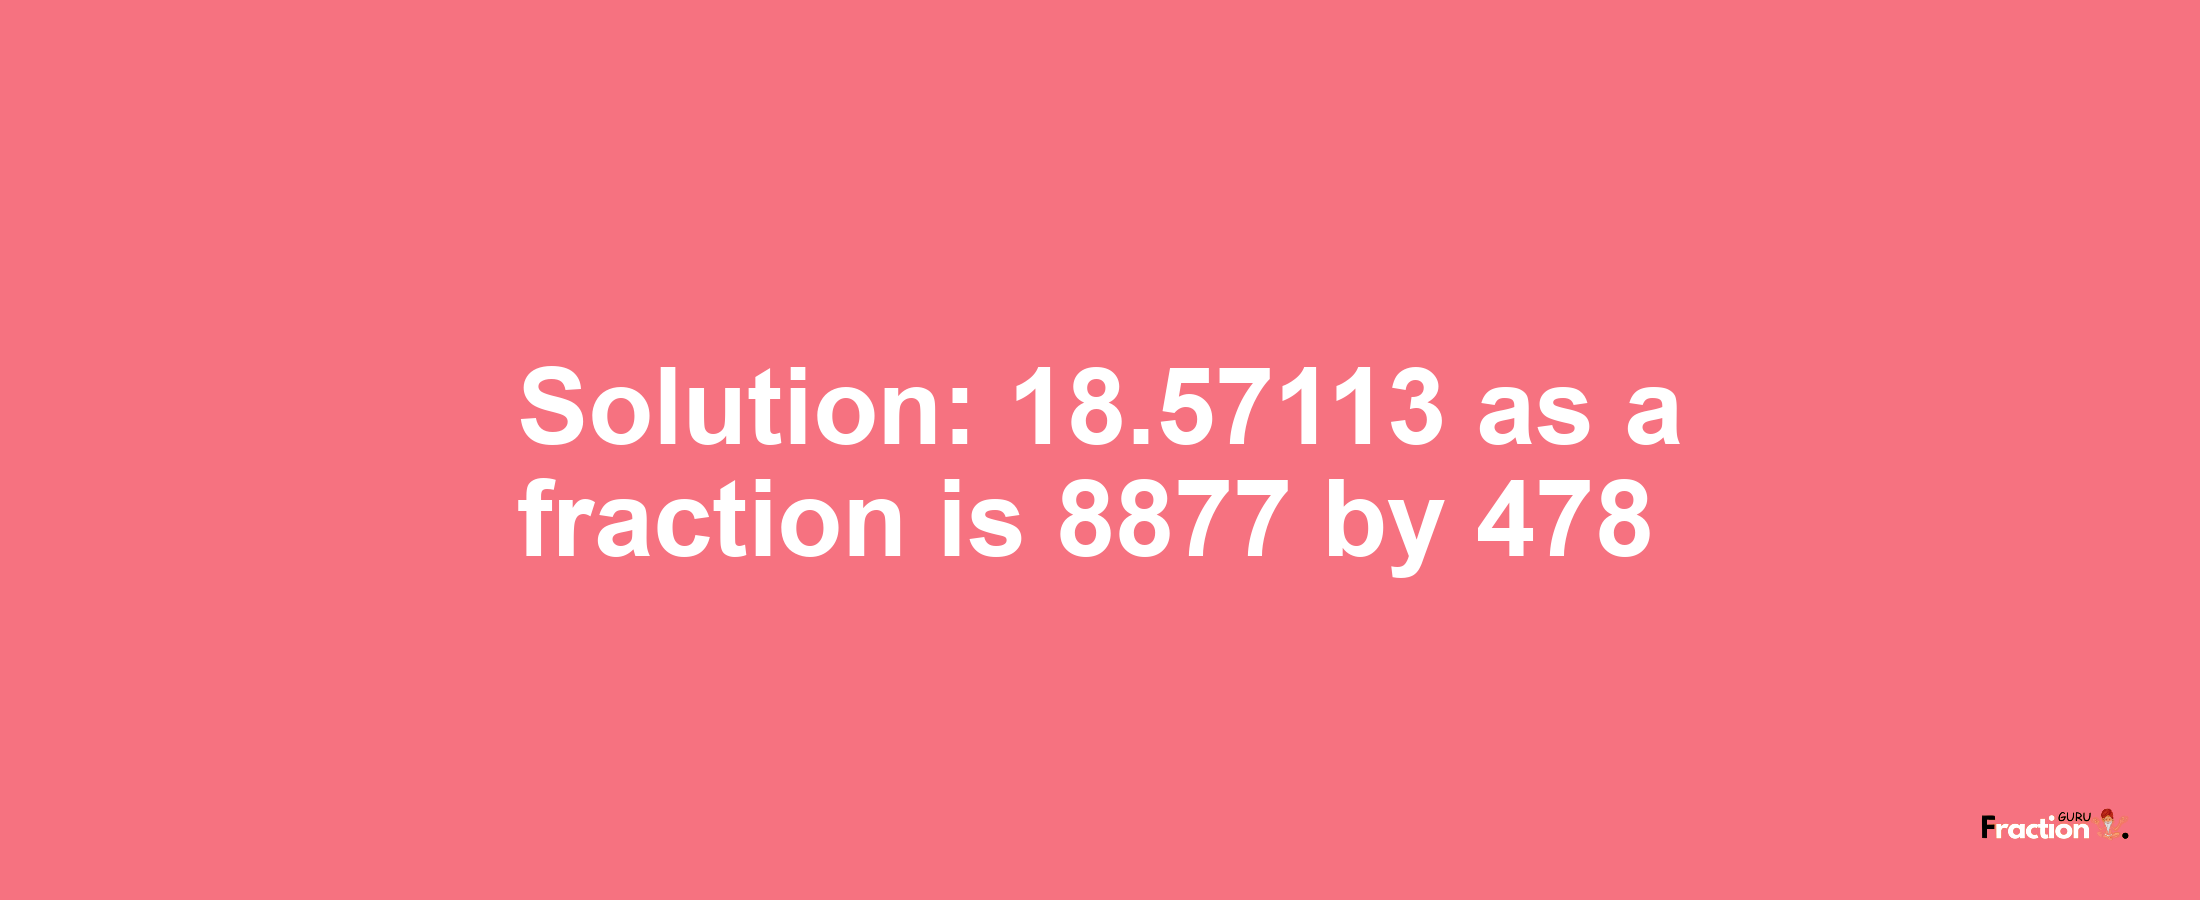 Solution:18.57113 as a fraction is 8877/478